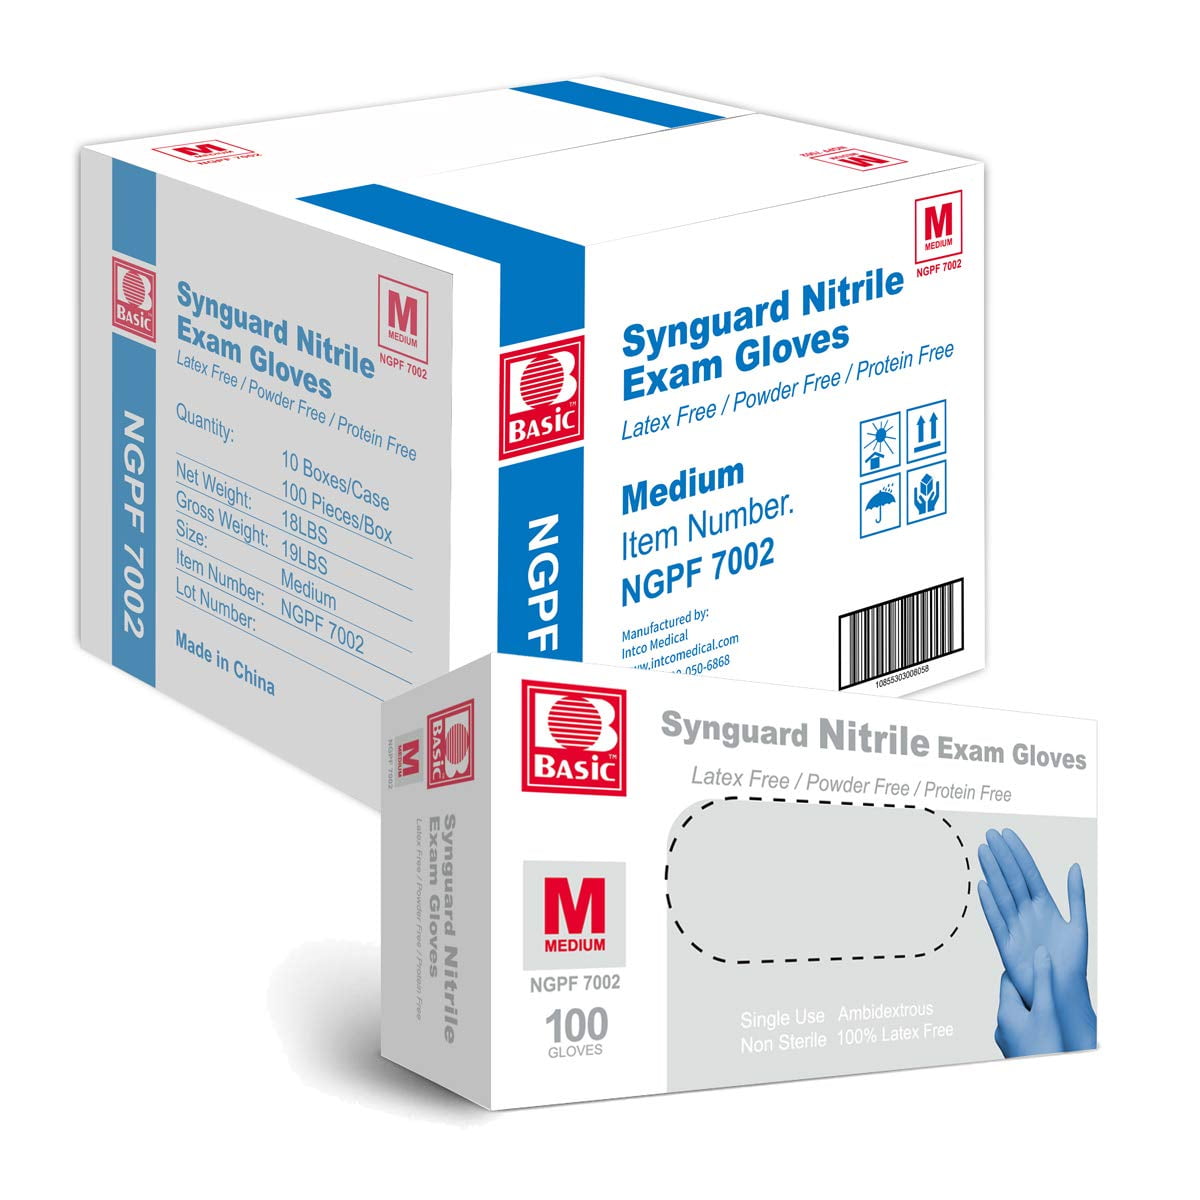 10 Boxes/Case Protein Free Blue Powder Free Disposable SynGuard Nitrile Exam Gloves 100/Box Medical Grade Latex Free 